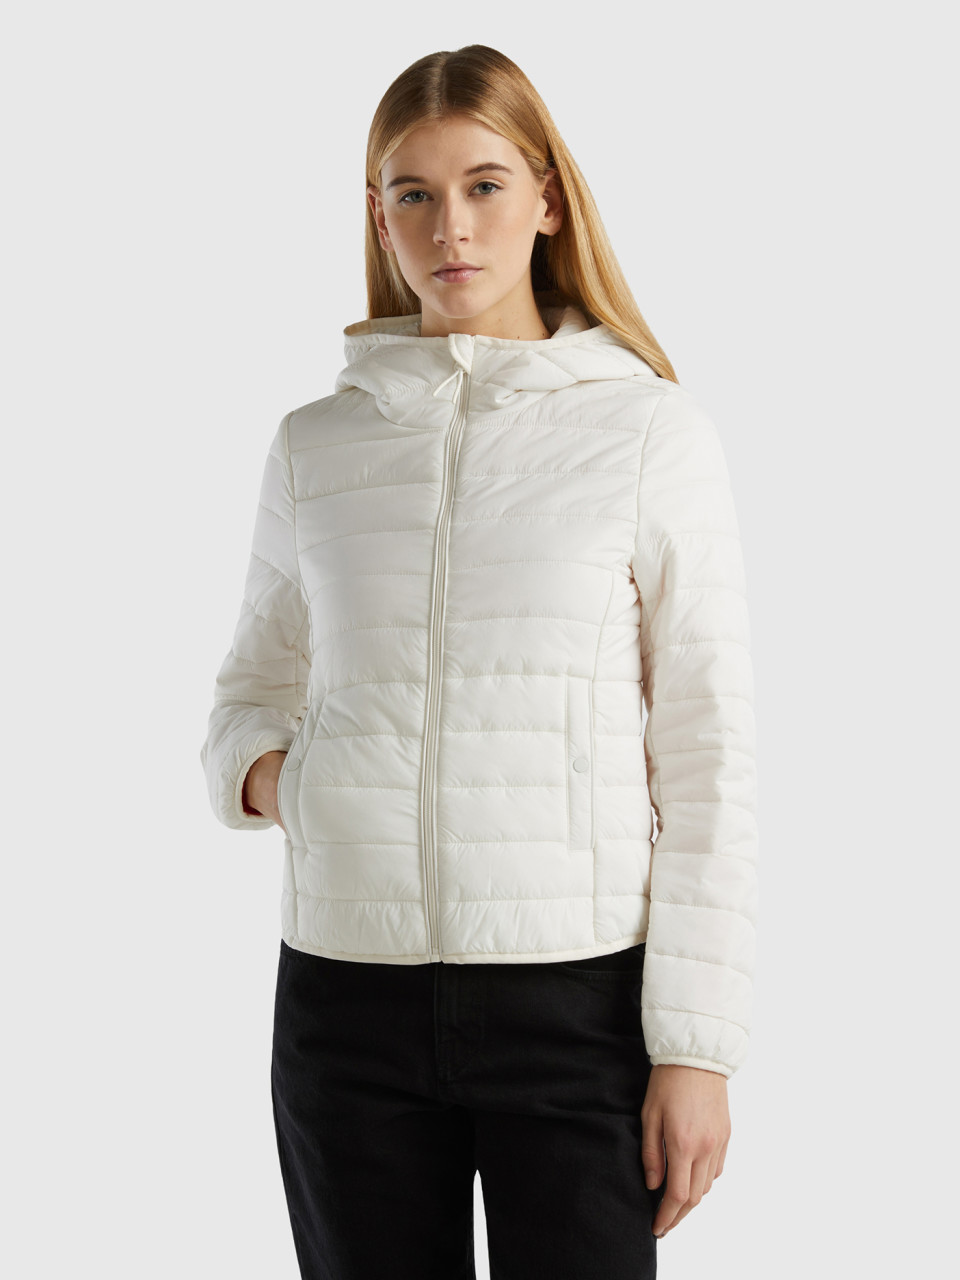 Benetton, Puffer Jacket With Recycled Wadding, Creamy White, Women